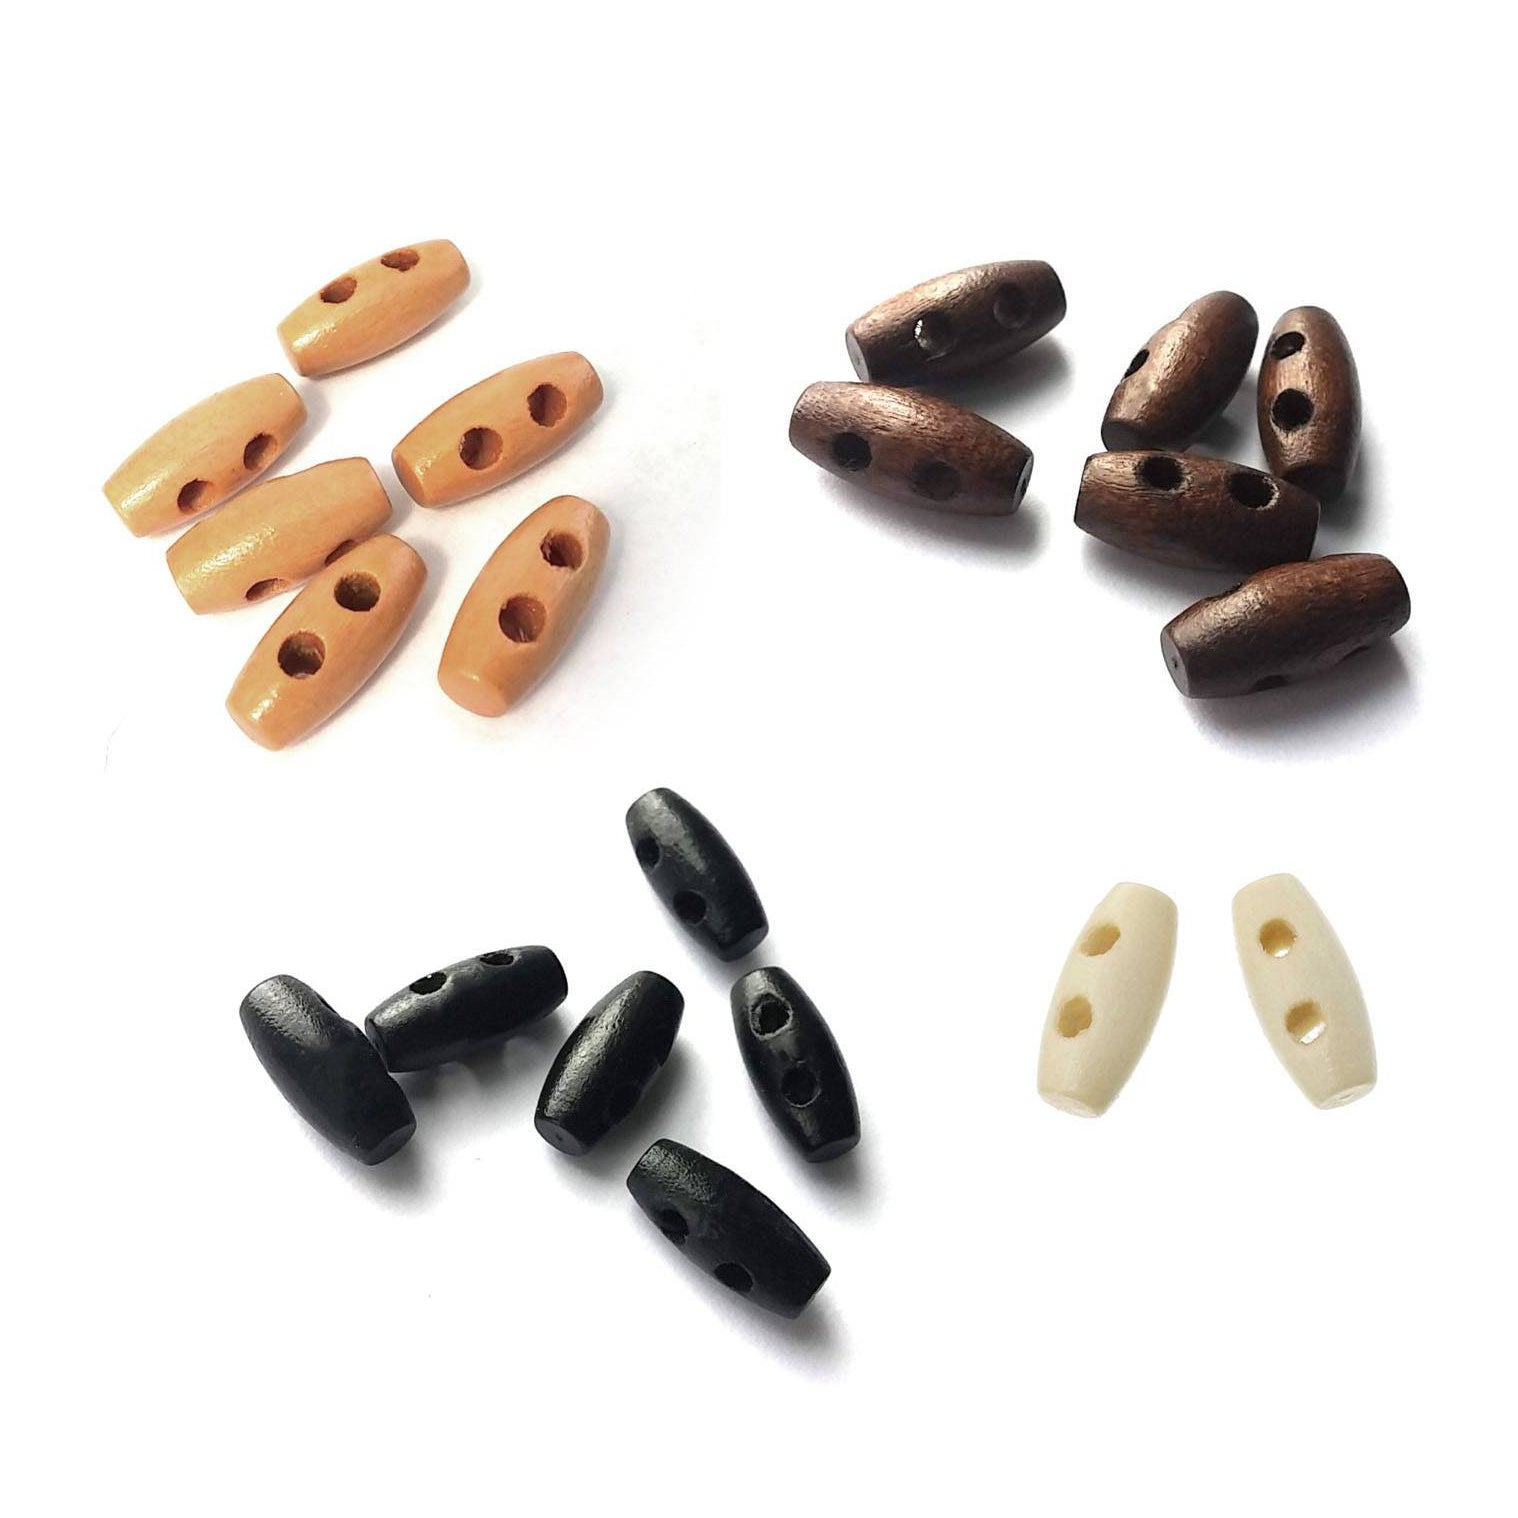 6 tiny wooden Toggle Buttons 15mm - Gold, brown, black or white